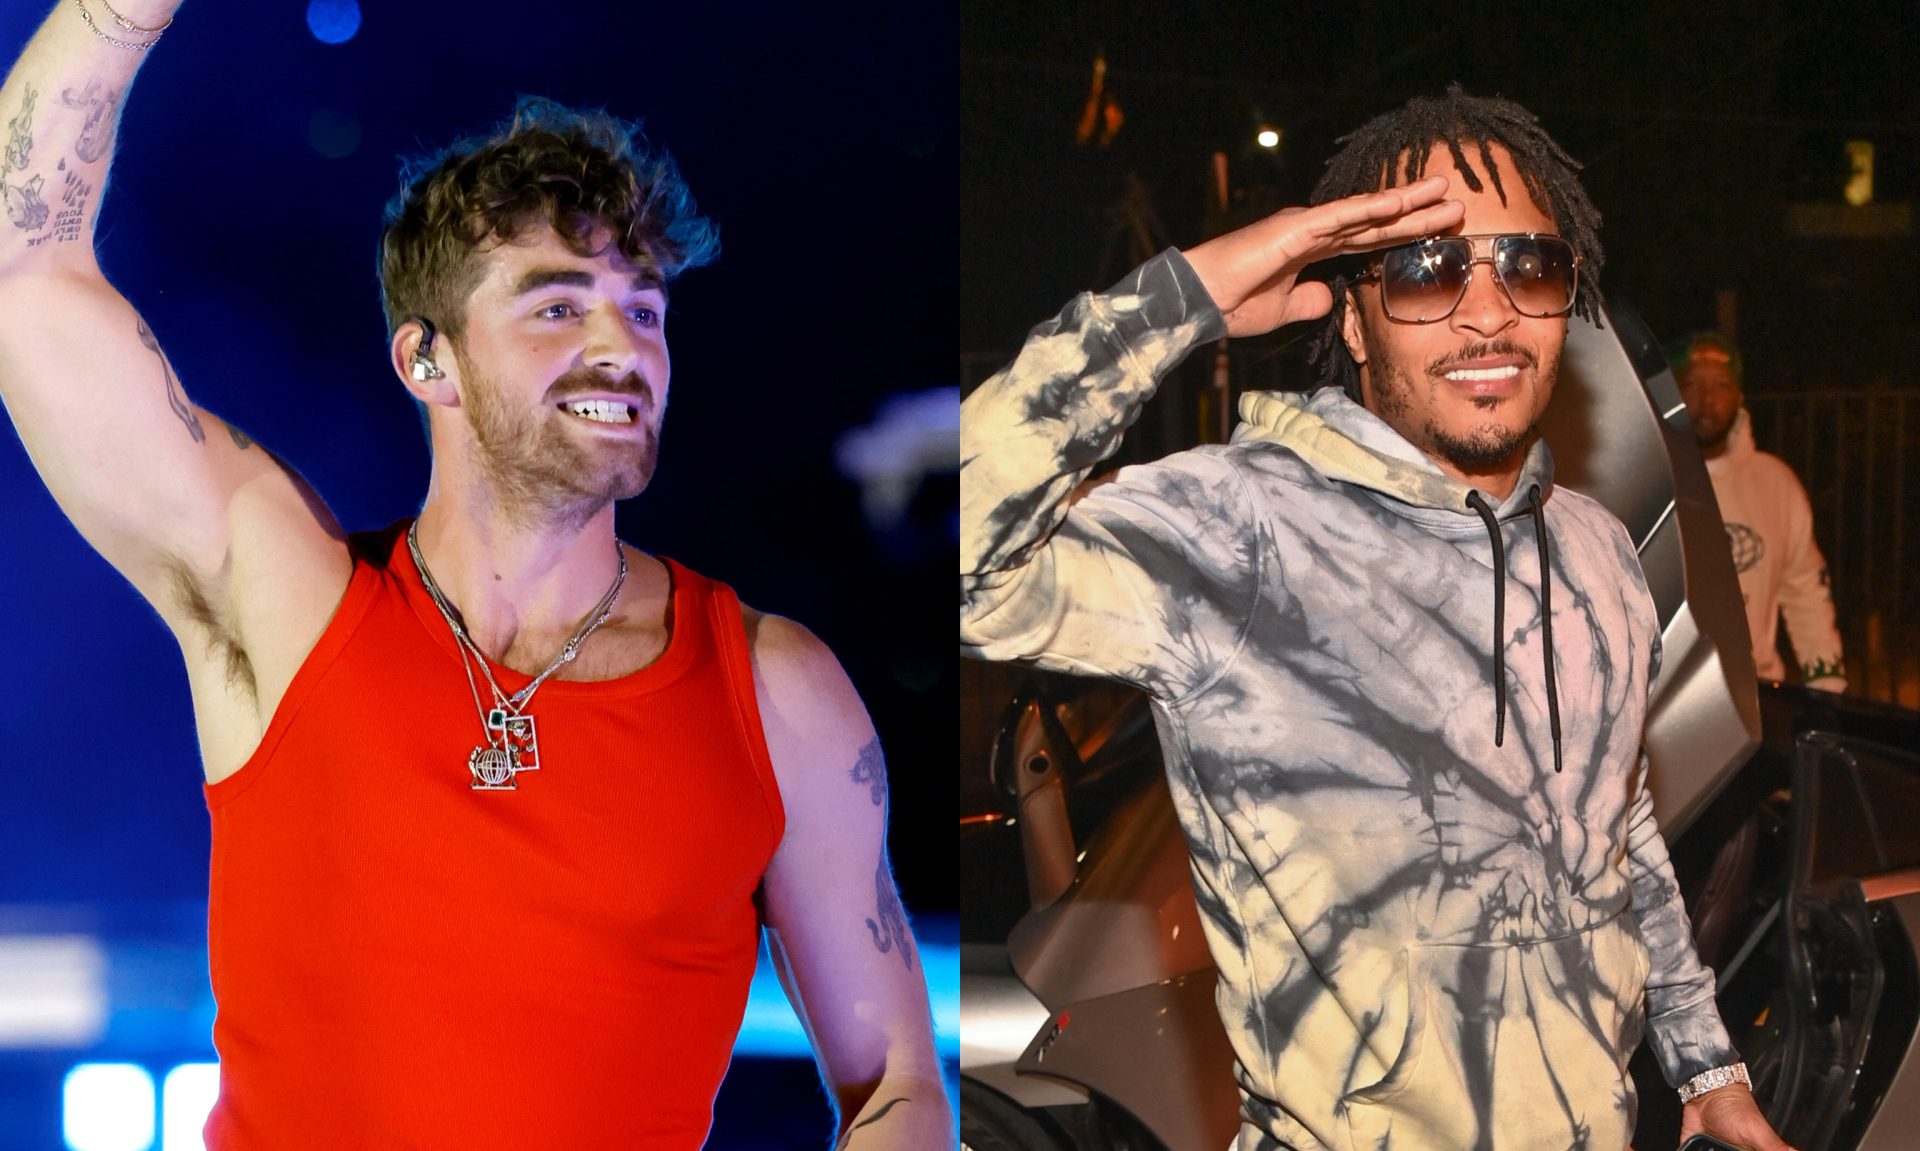 Chainsmokers’ Drew Taggart Claims T.I. Punched Him In The Face Over A Kiss On The Cheek, Says T.I. Is “In The Right” 